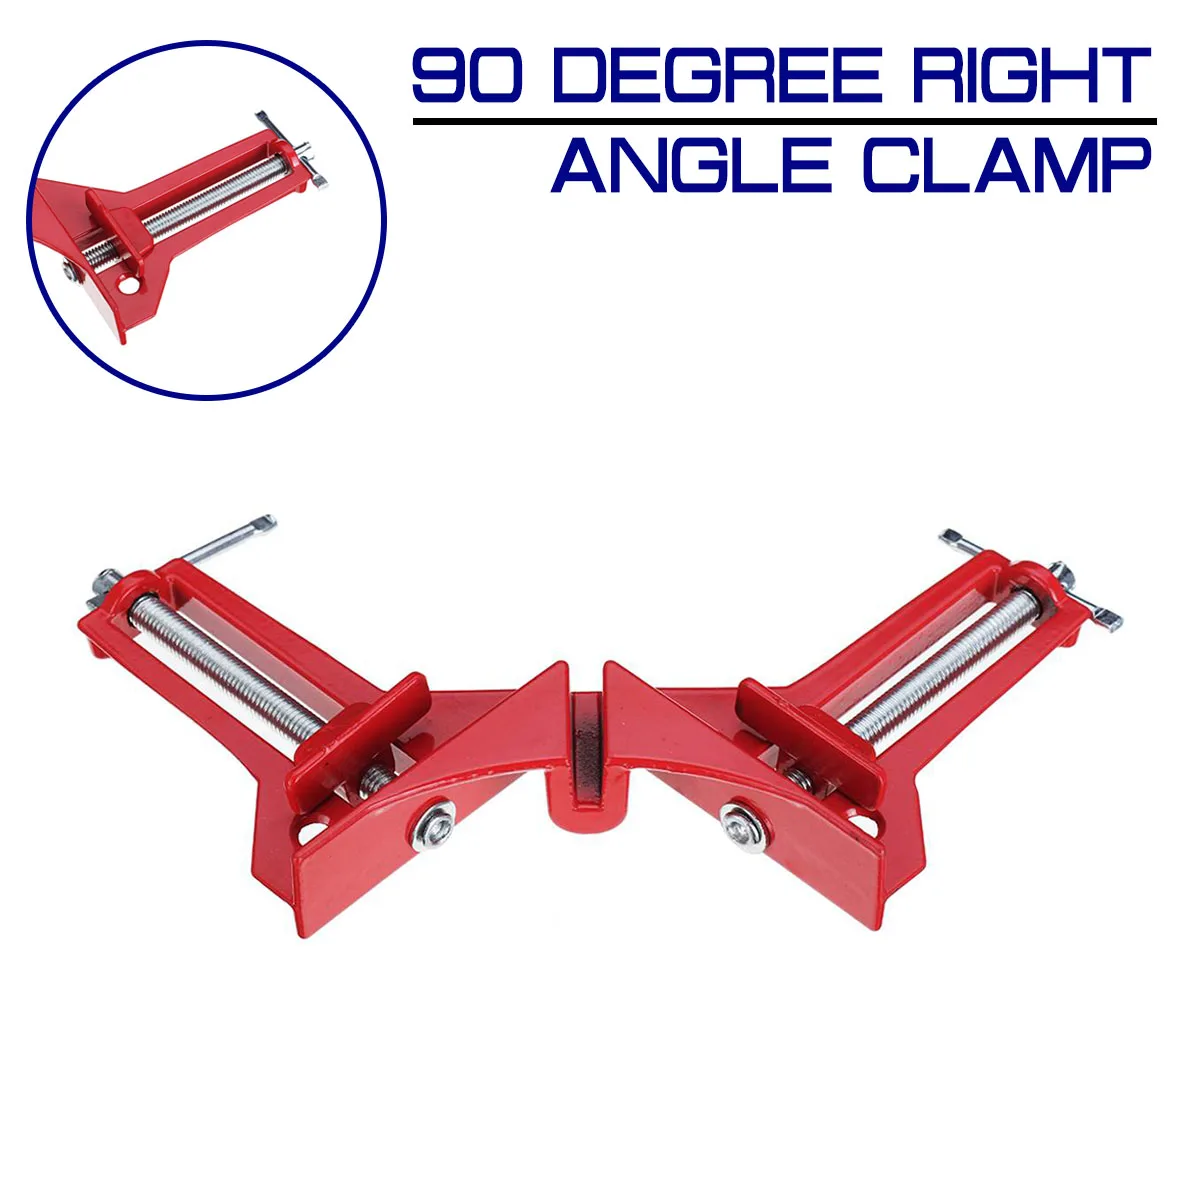 

4pcs Rugged 90 Degree Right Angle Clamp DIY Corner Clamps Quick Fixed Glass Wood Picture Fishtank Frame Woodwork Right Angle